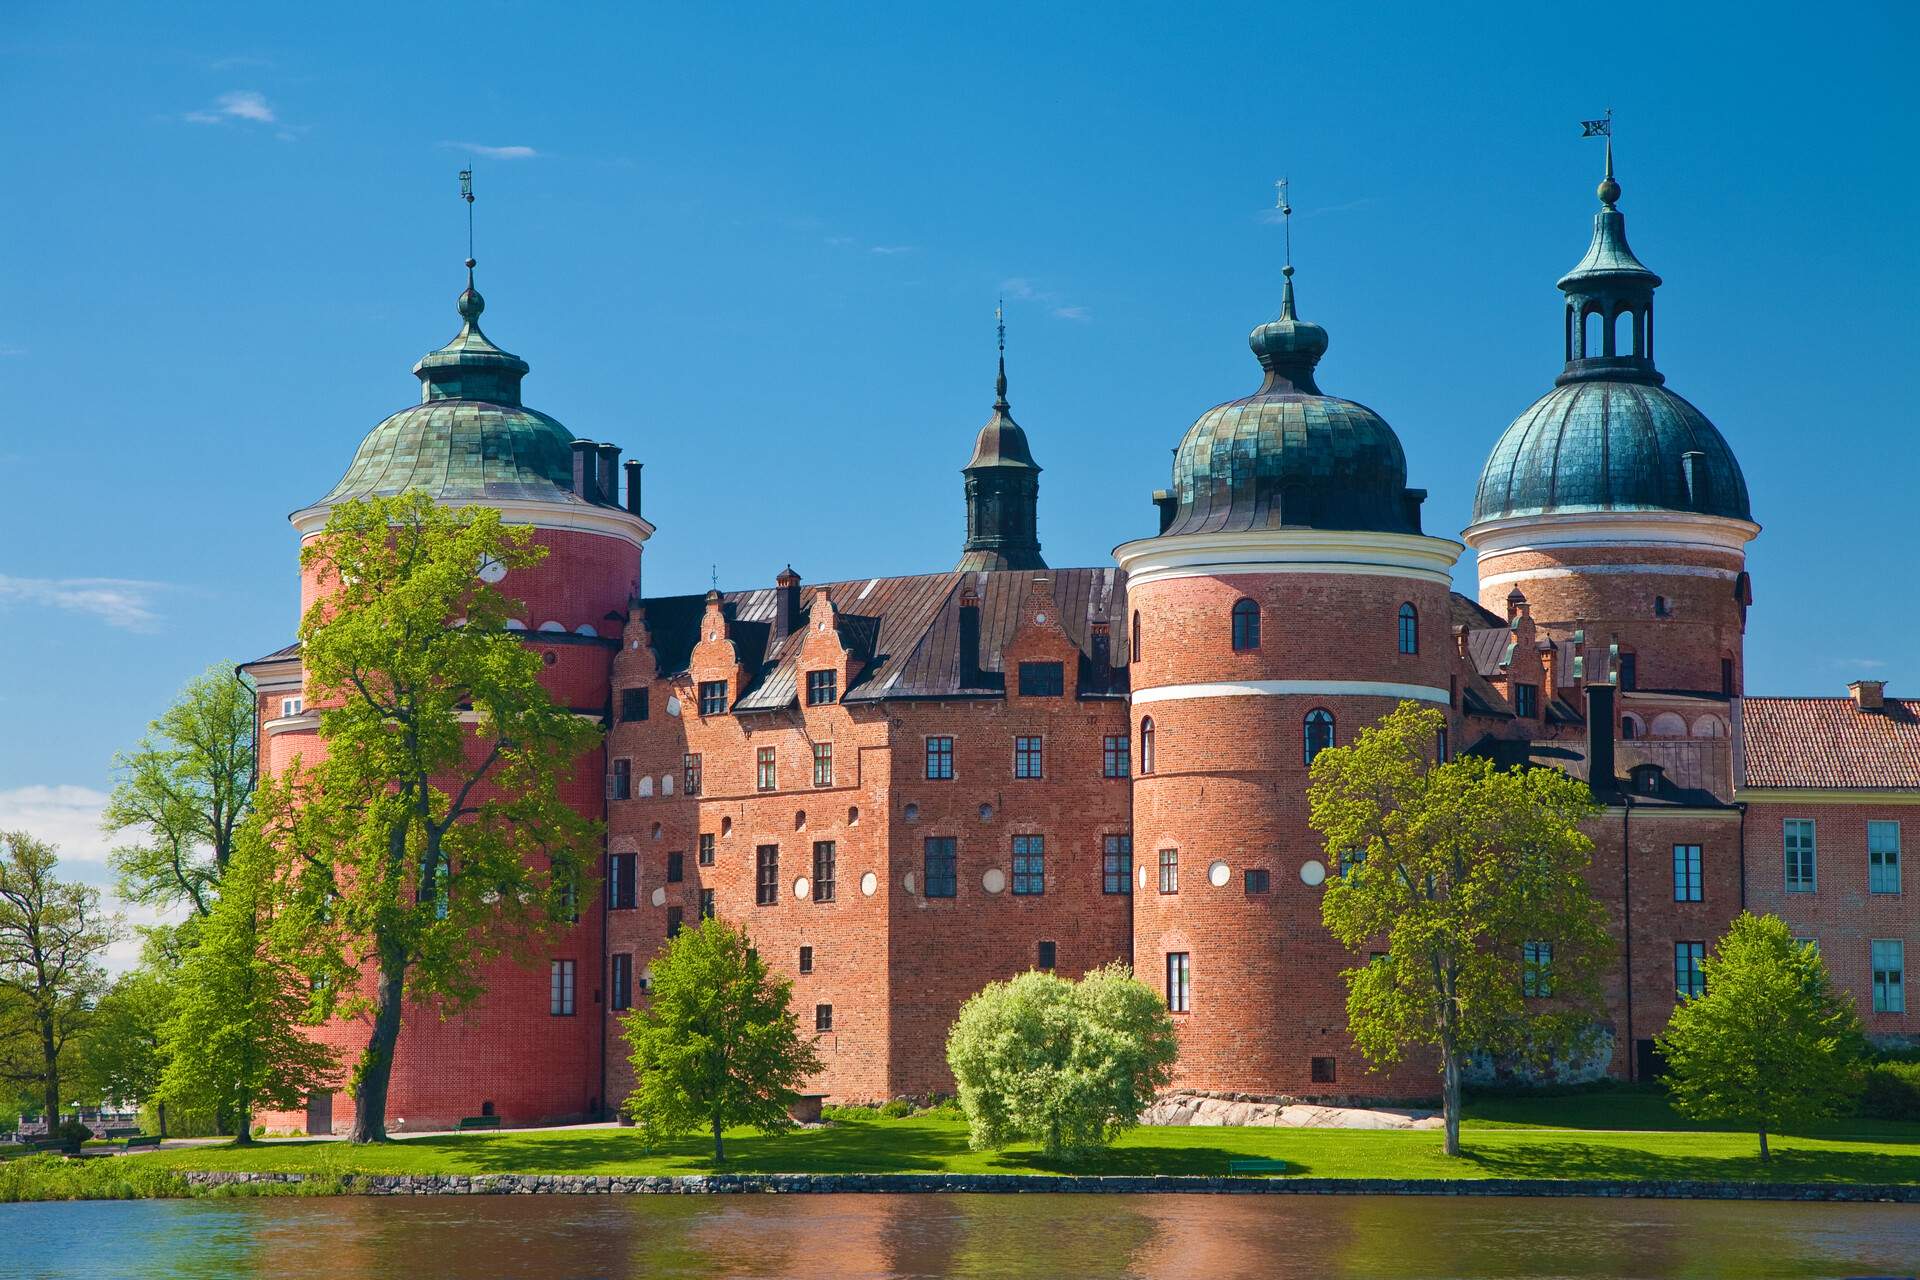 Gripsholm Castle is a renaissance castle with orange walls, round towers, and dome roofs with sharp pinnacles.